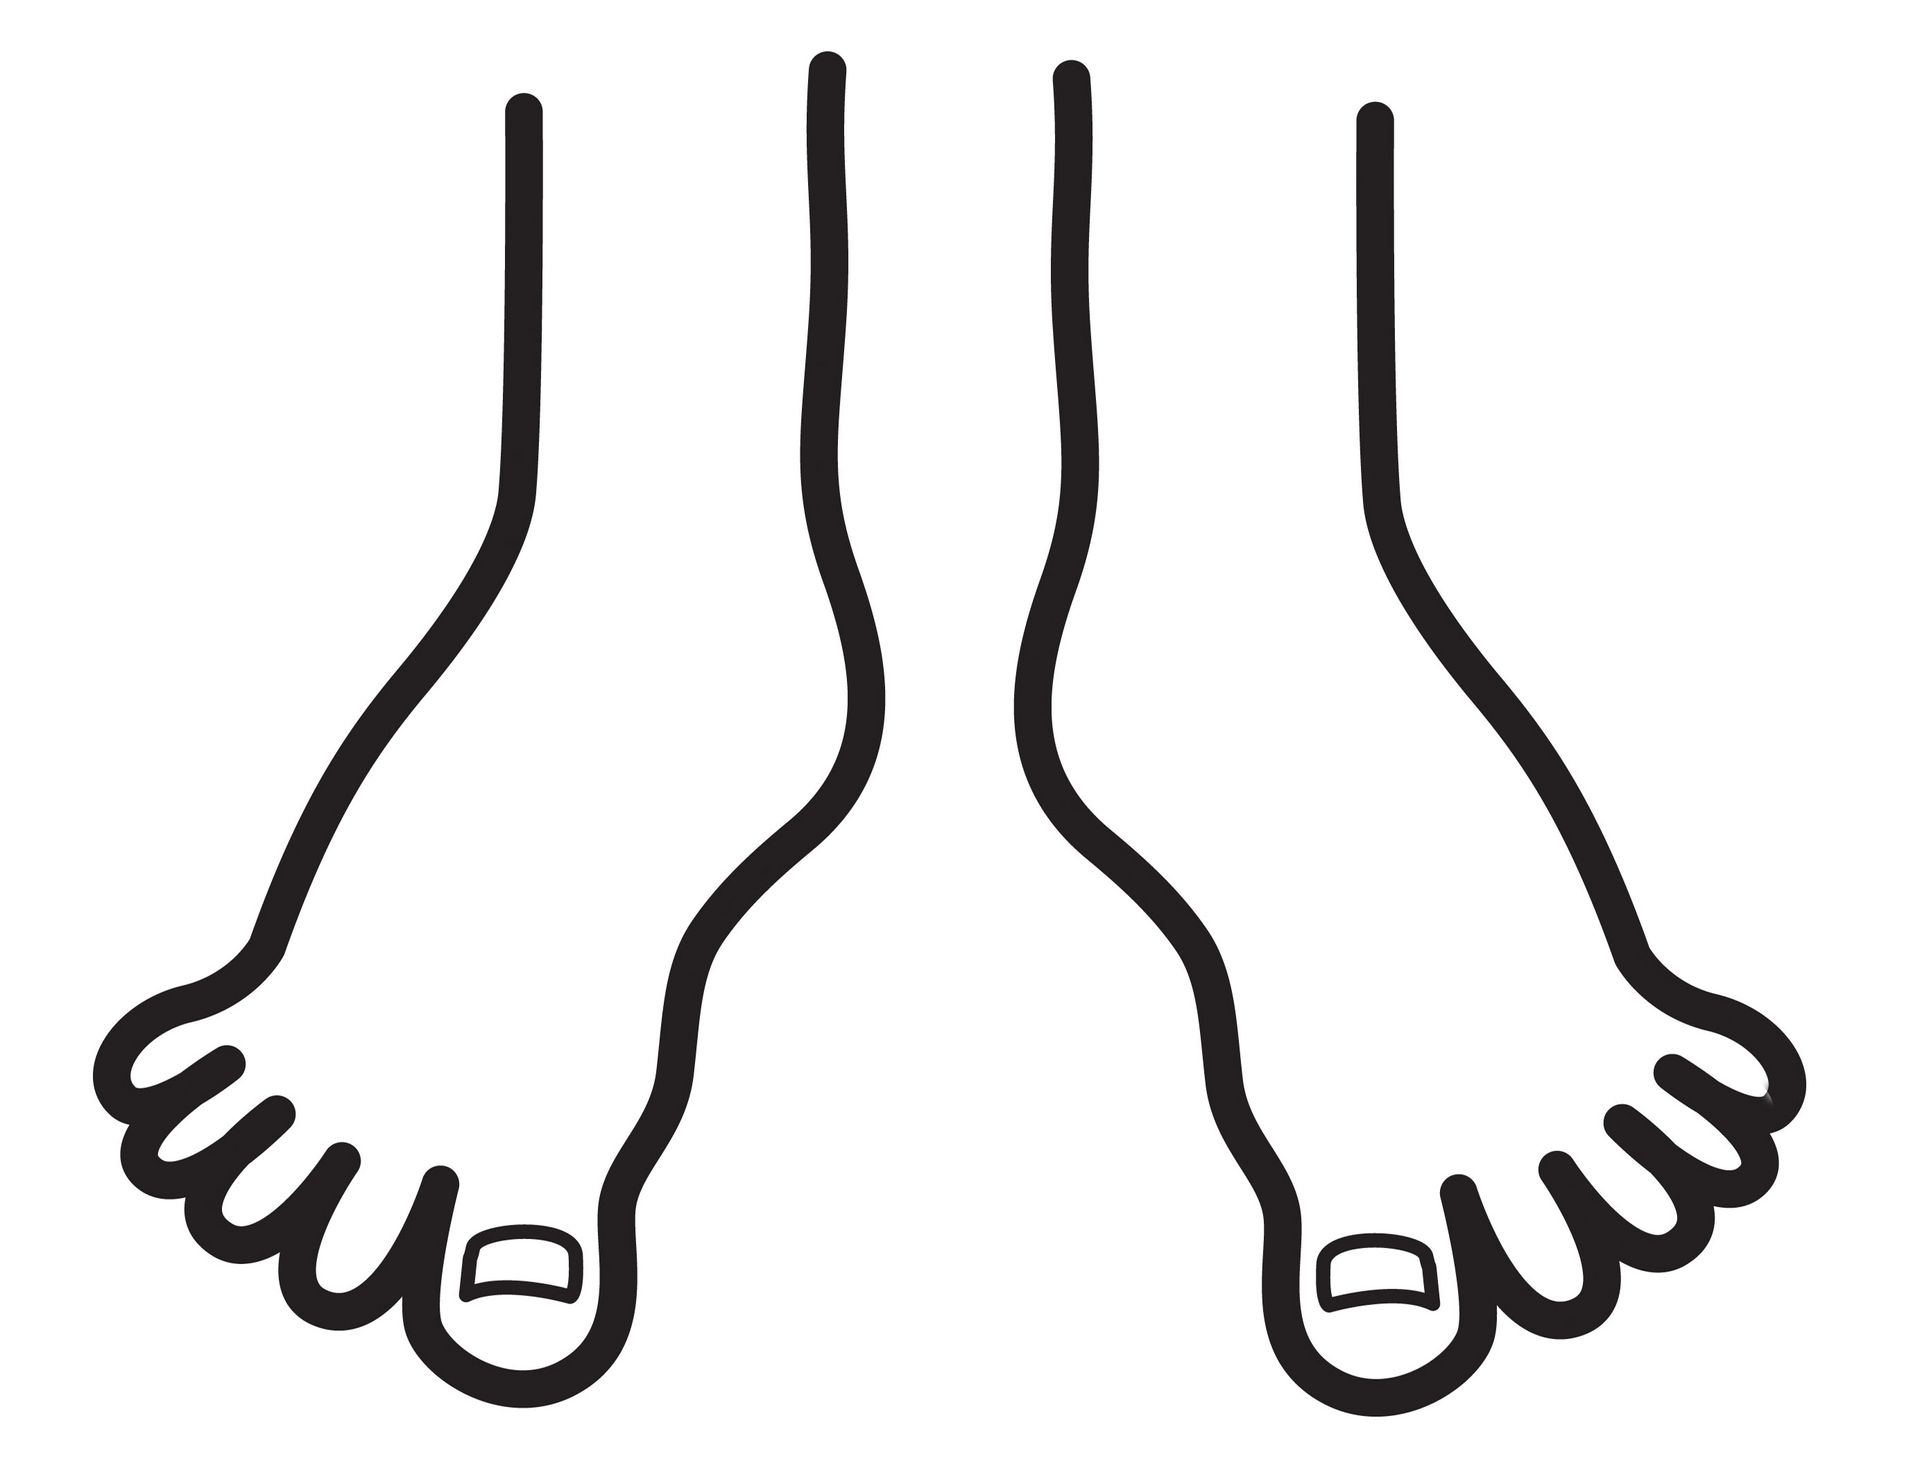 An illustration of two feet.